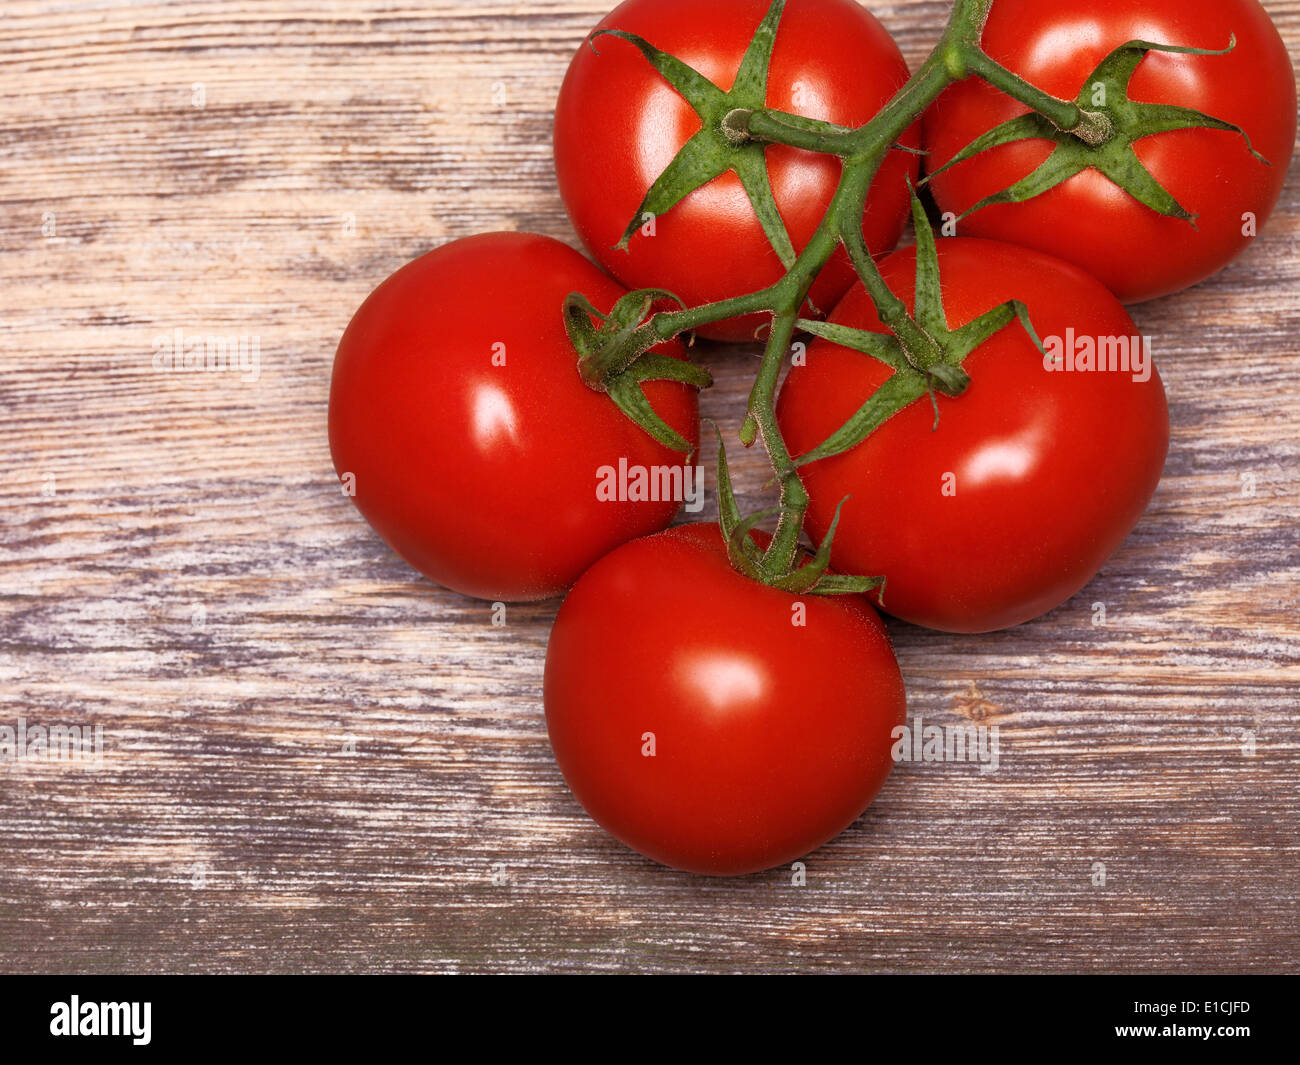 Red tomatoes on rustic wooden background Stock Photo